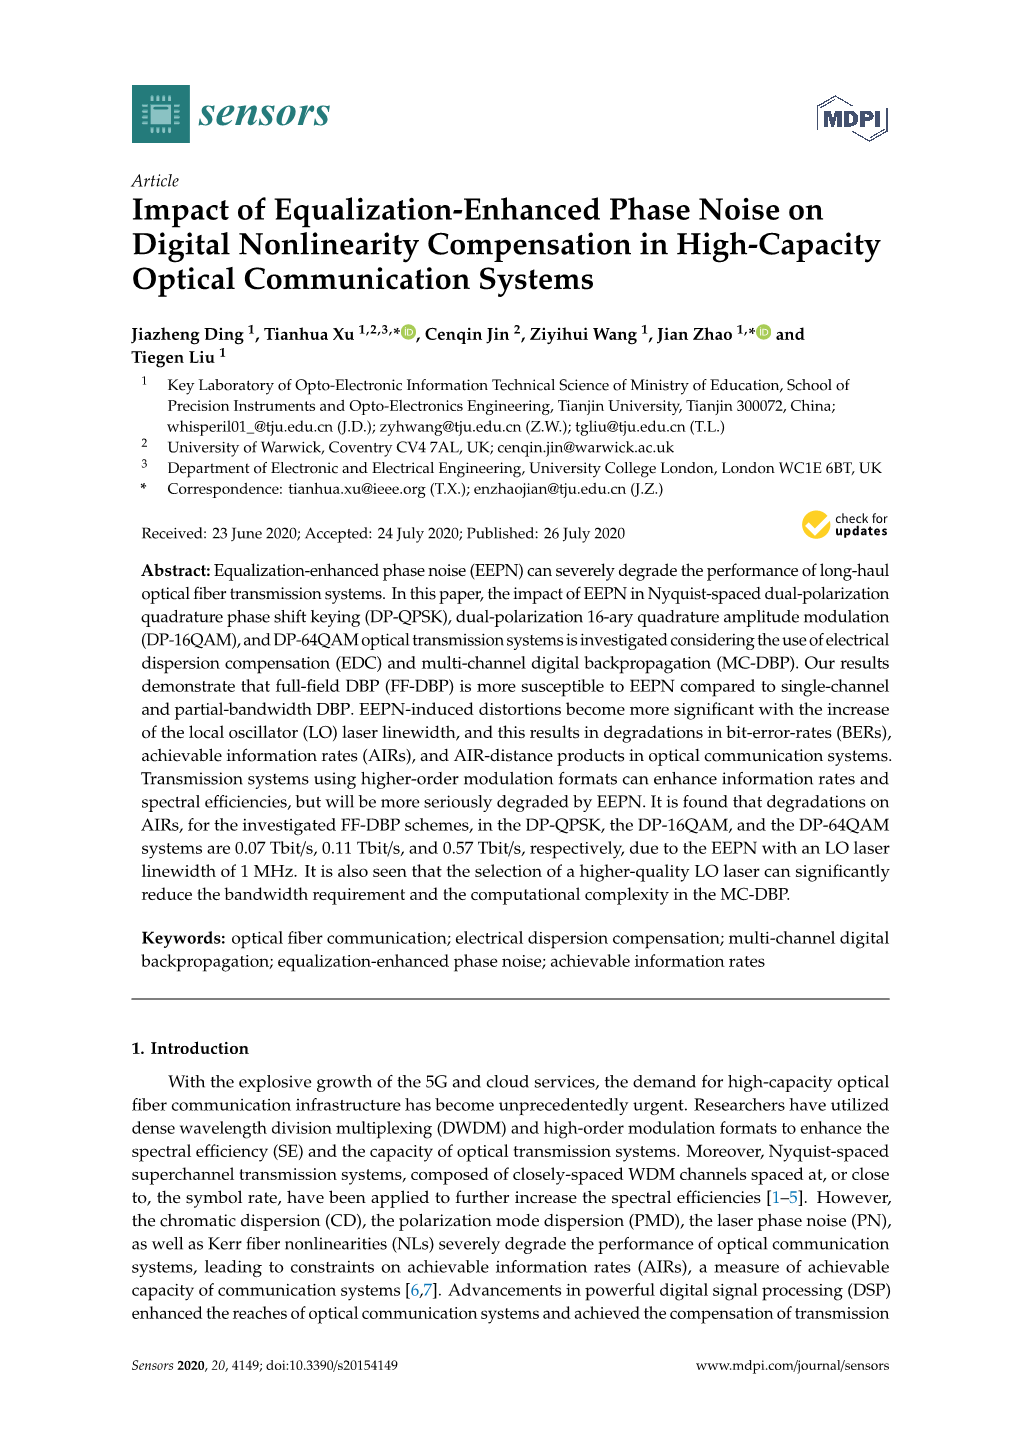 Impact of Equalization-Enhanced Phase Noise on Digital Nonlinearity Compensation in High-Capacity Optical Communication Systems